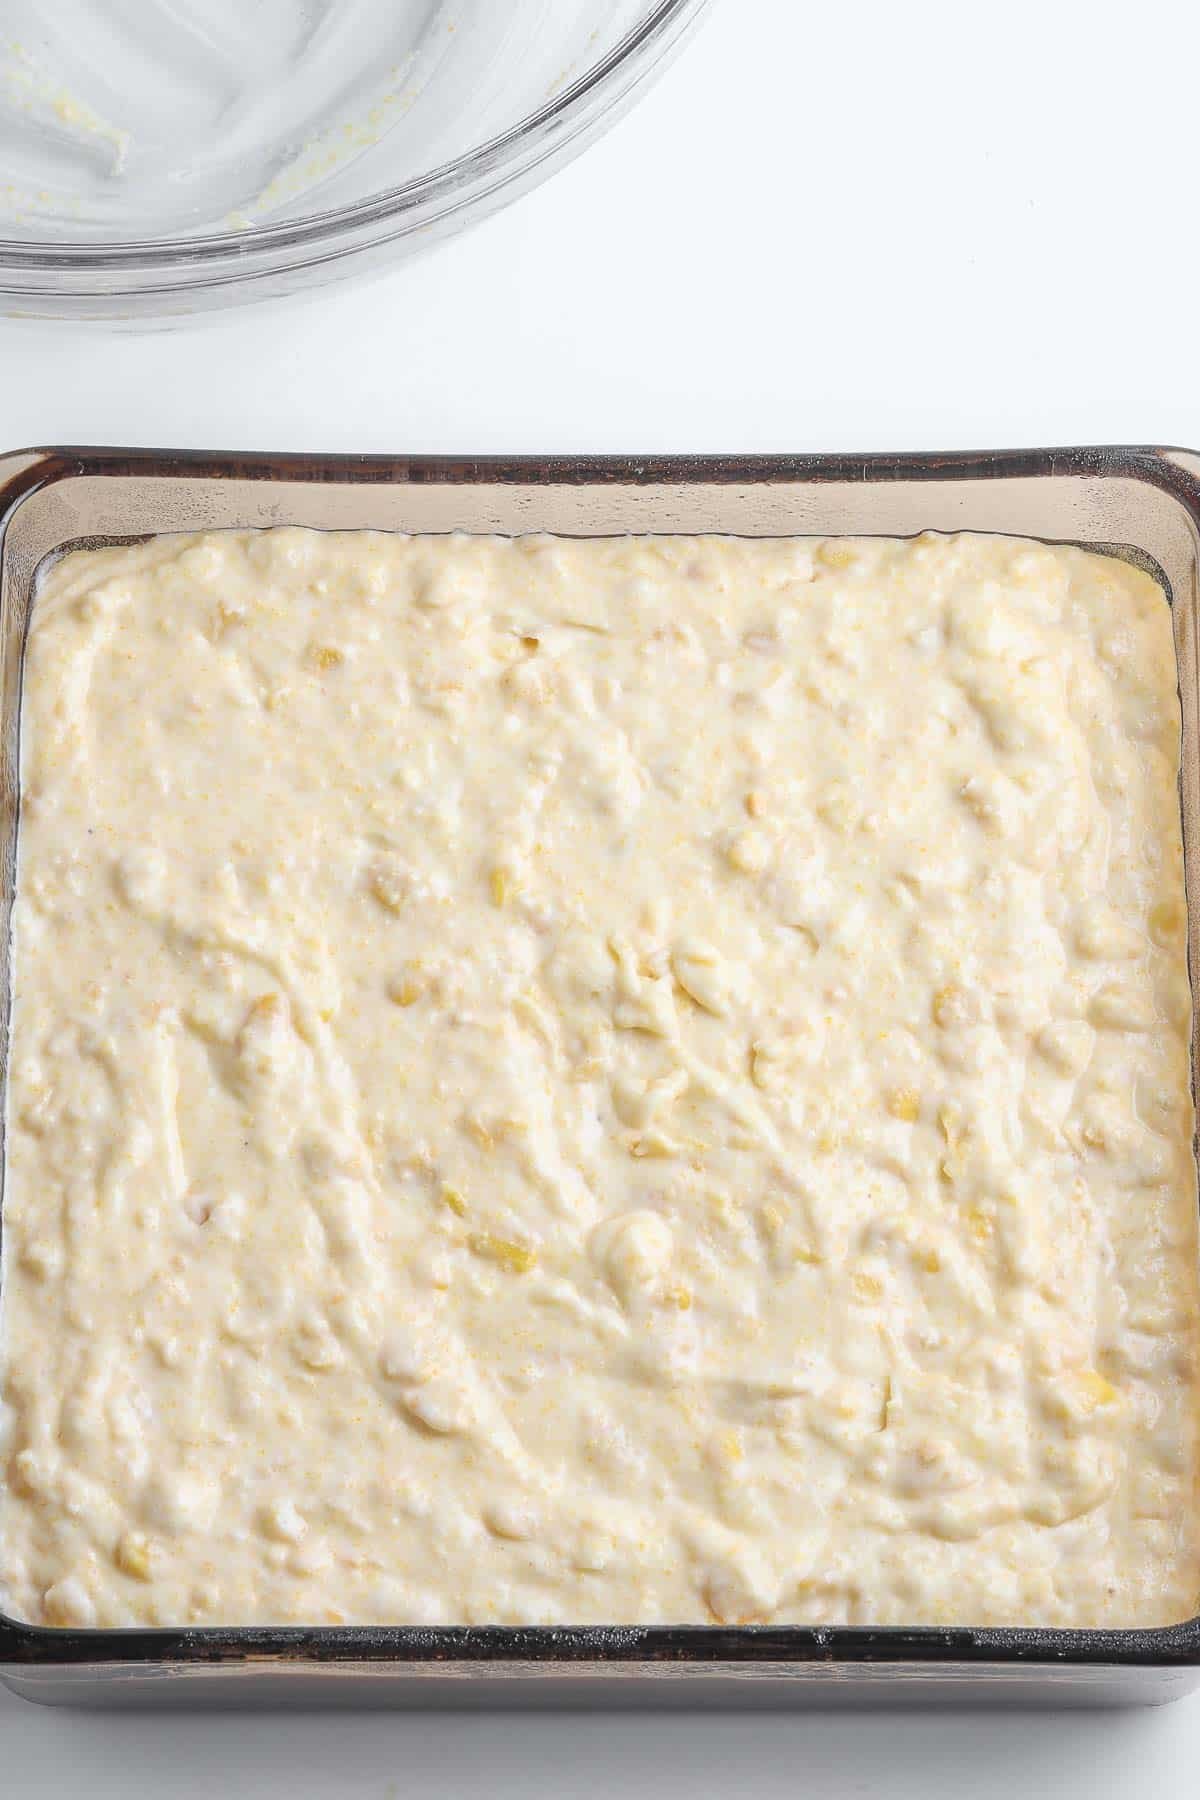 A baking dish with a corn casserole mix in it.